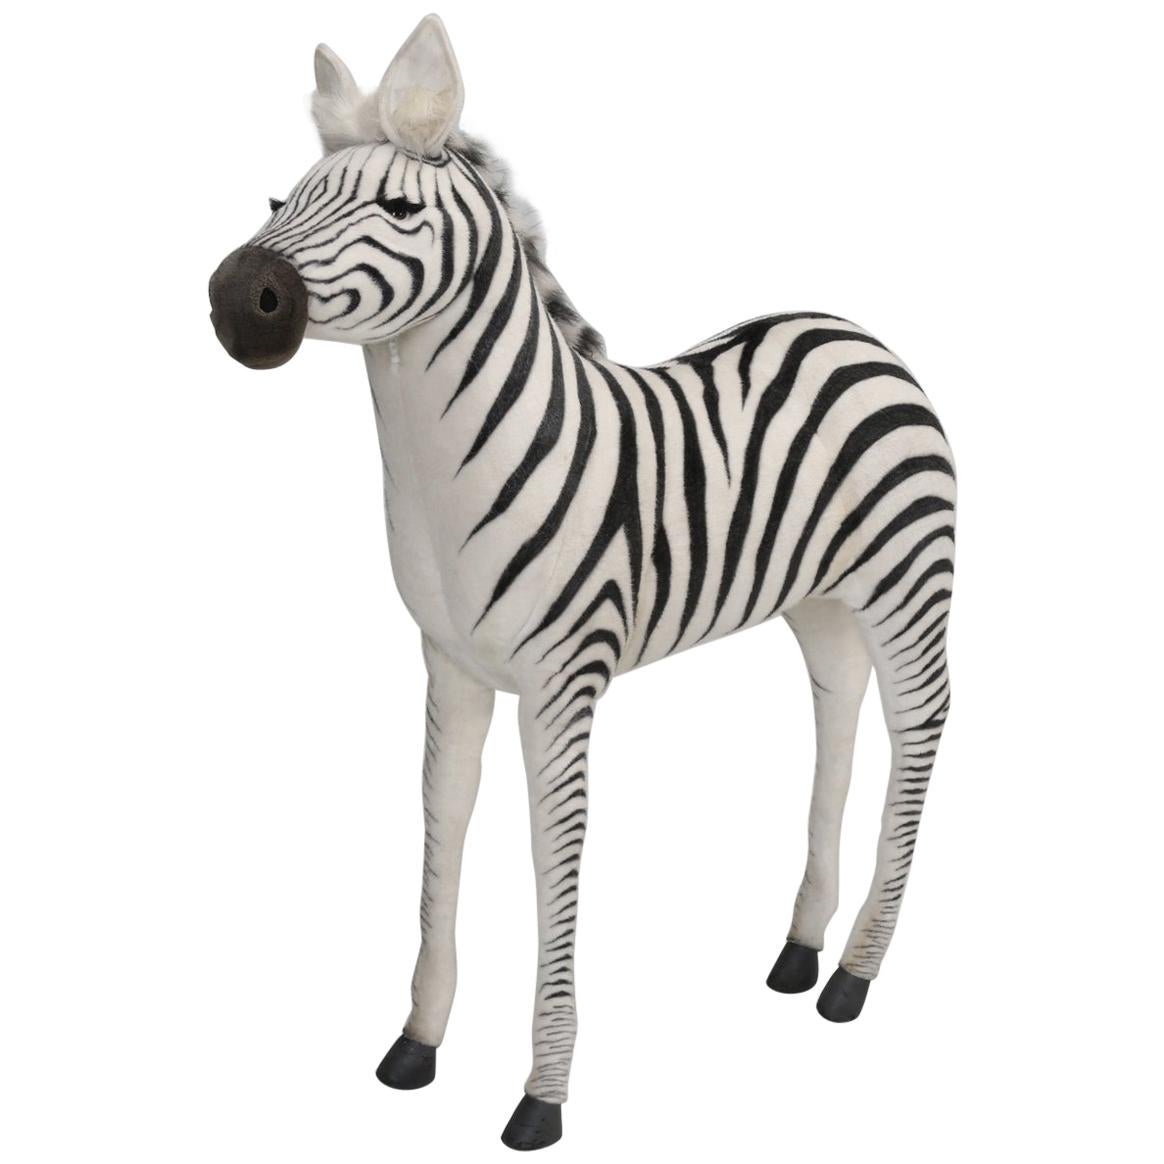 Mechanical or Animated Huge Stuffed Zebra, by Hansa and Four Feet High For Sale